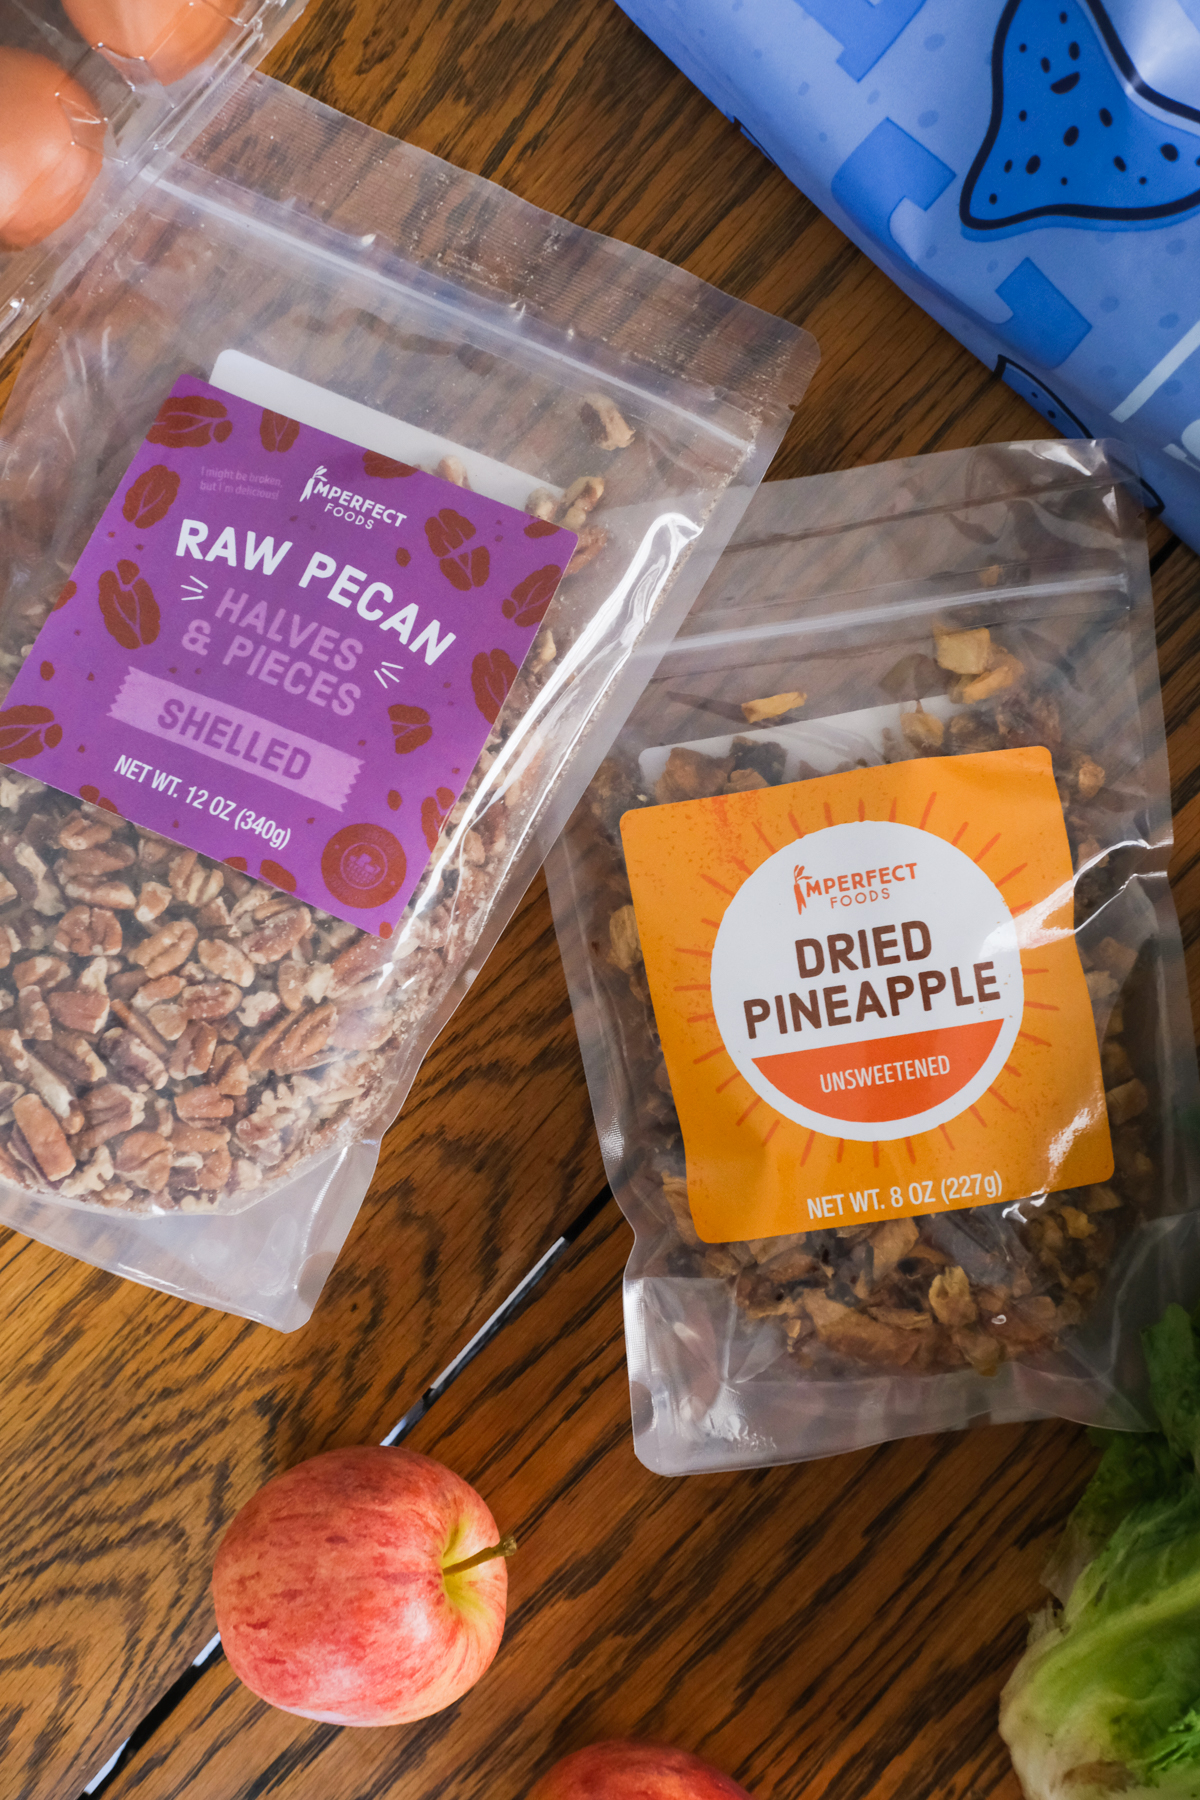 dried nut and fruit bags from my imperfect foods box